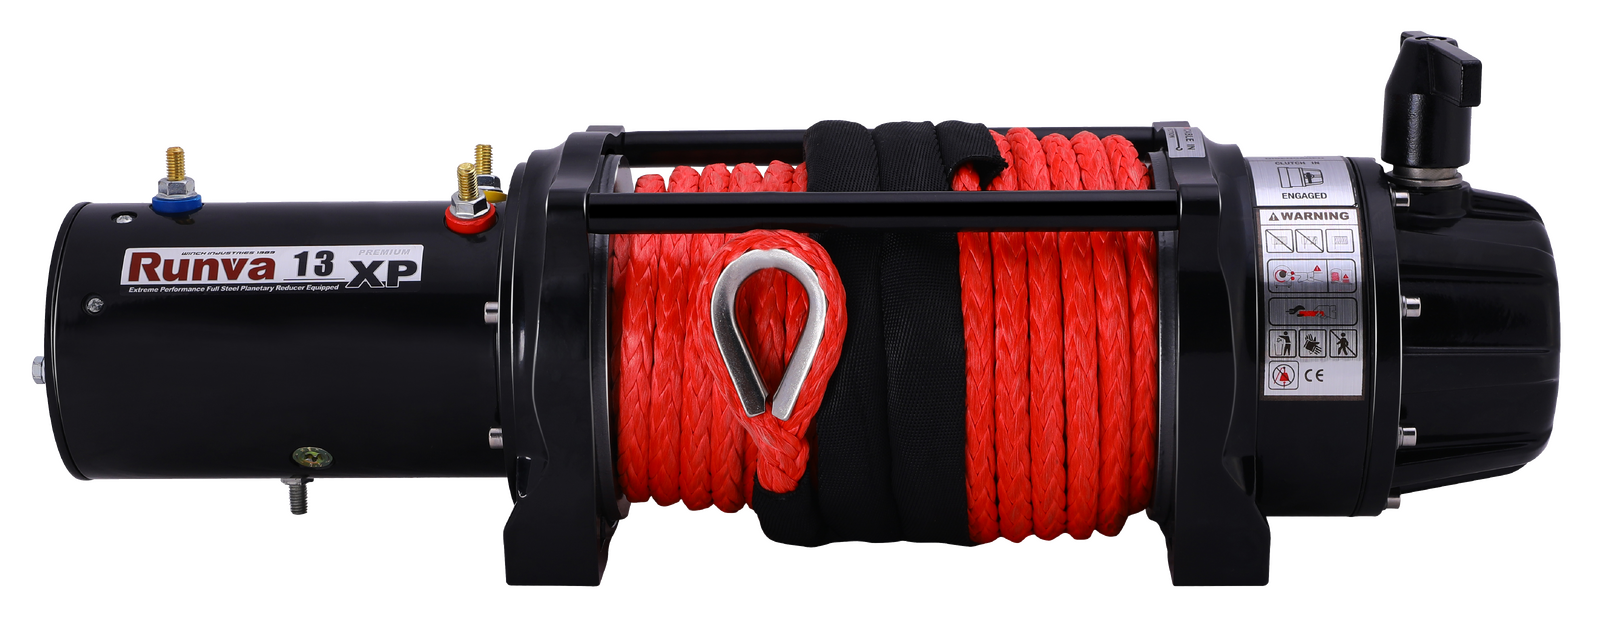 Runva 13xp winch front view on transparant background